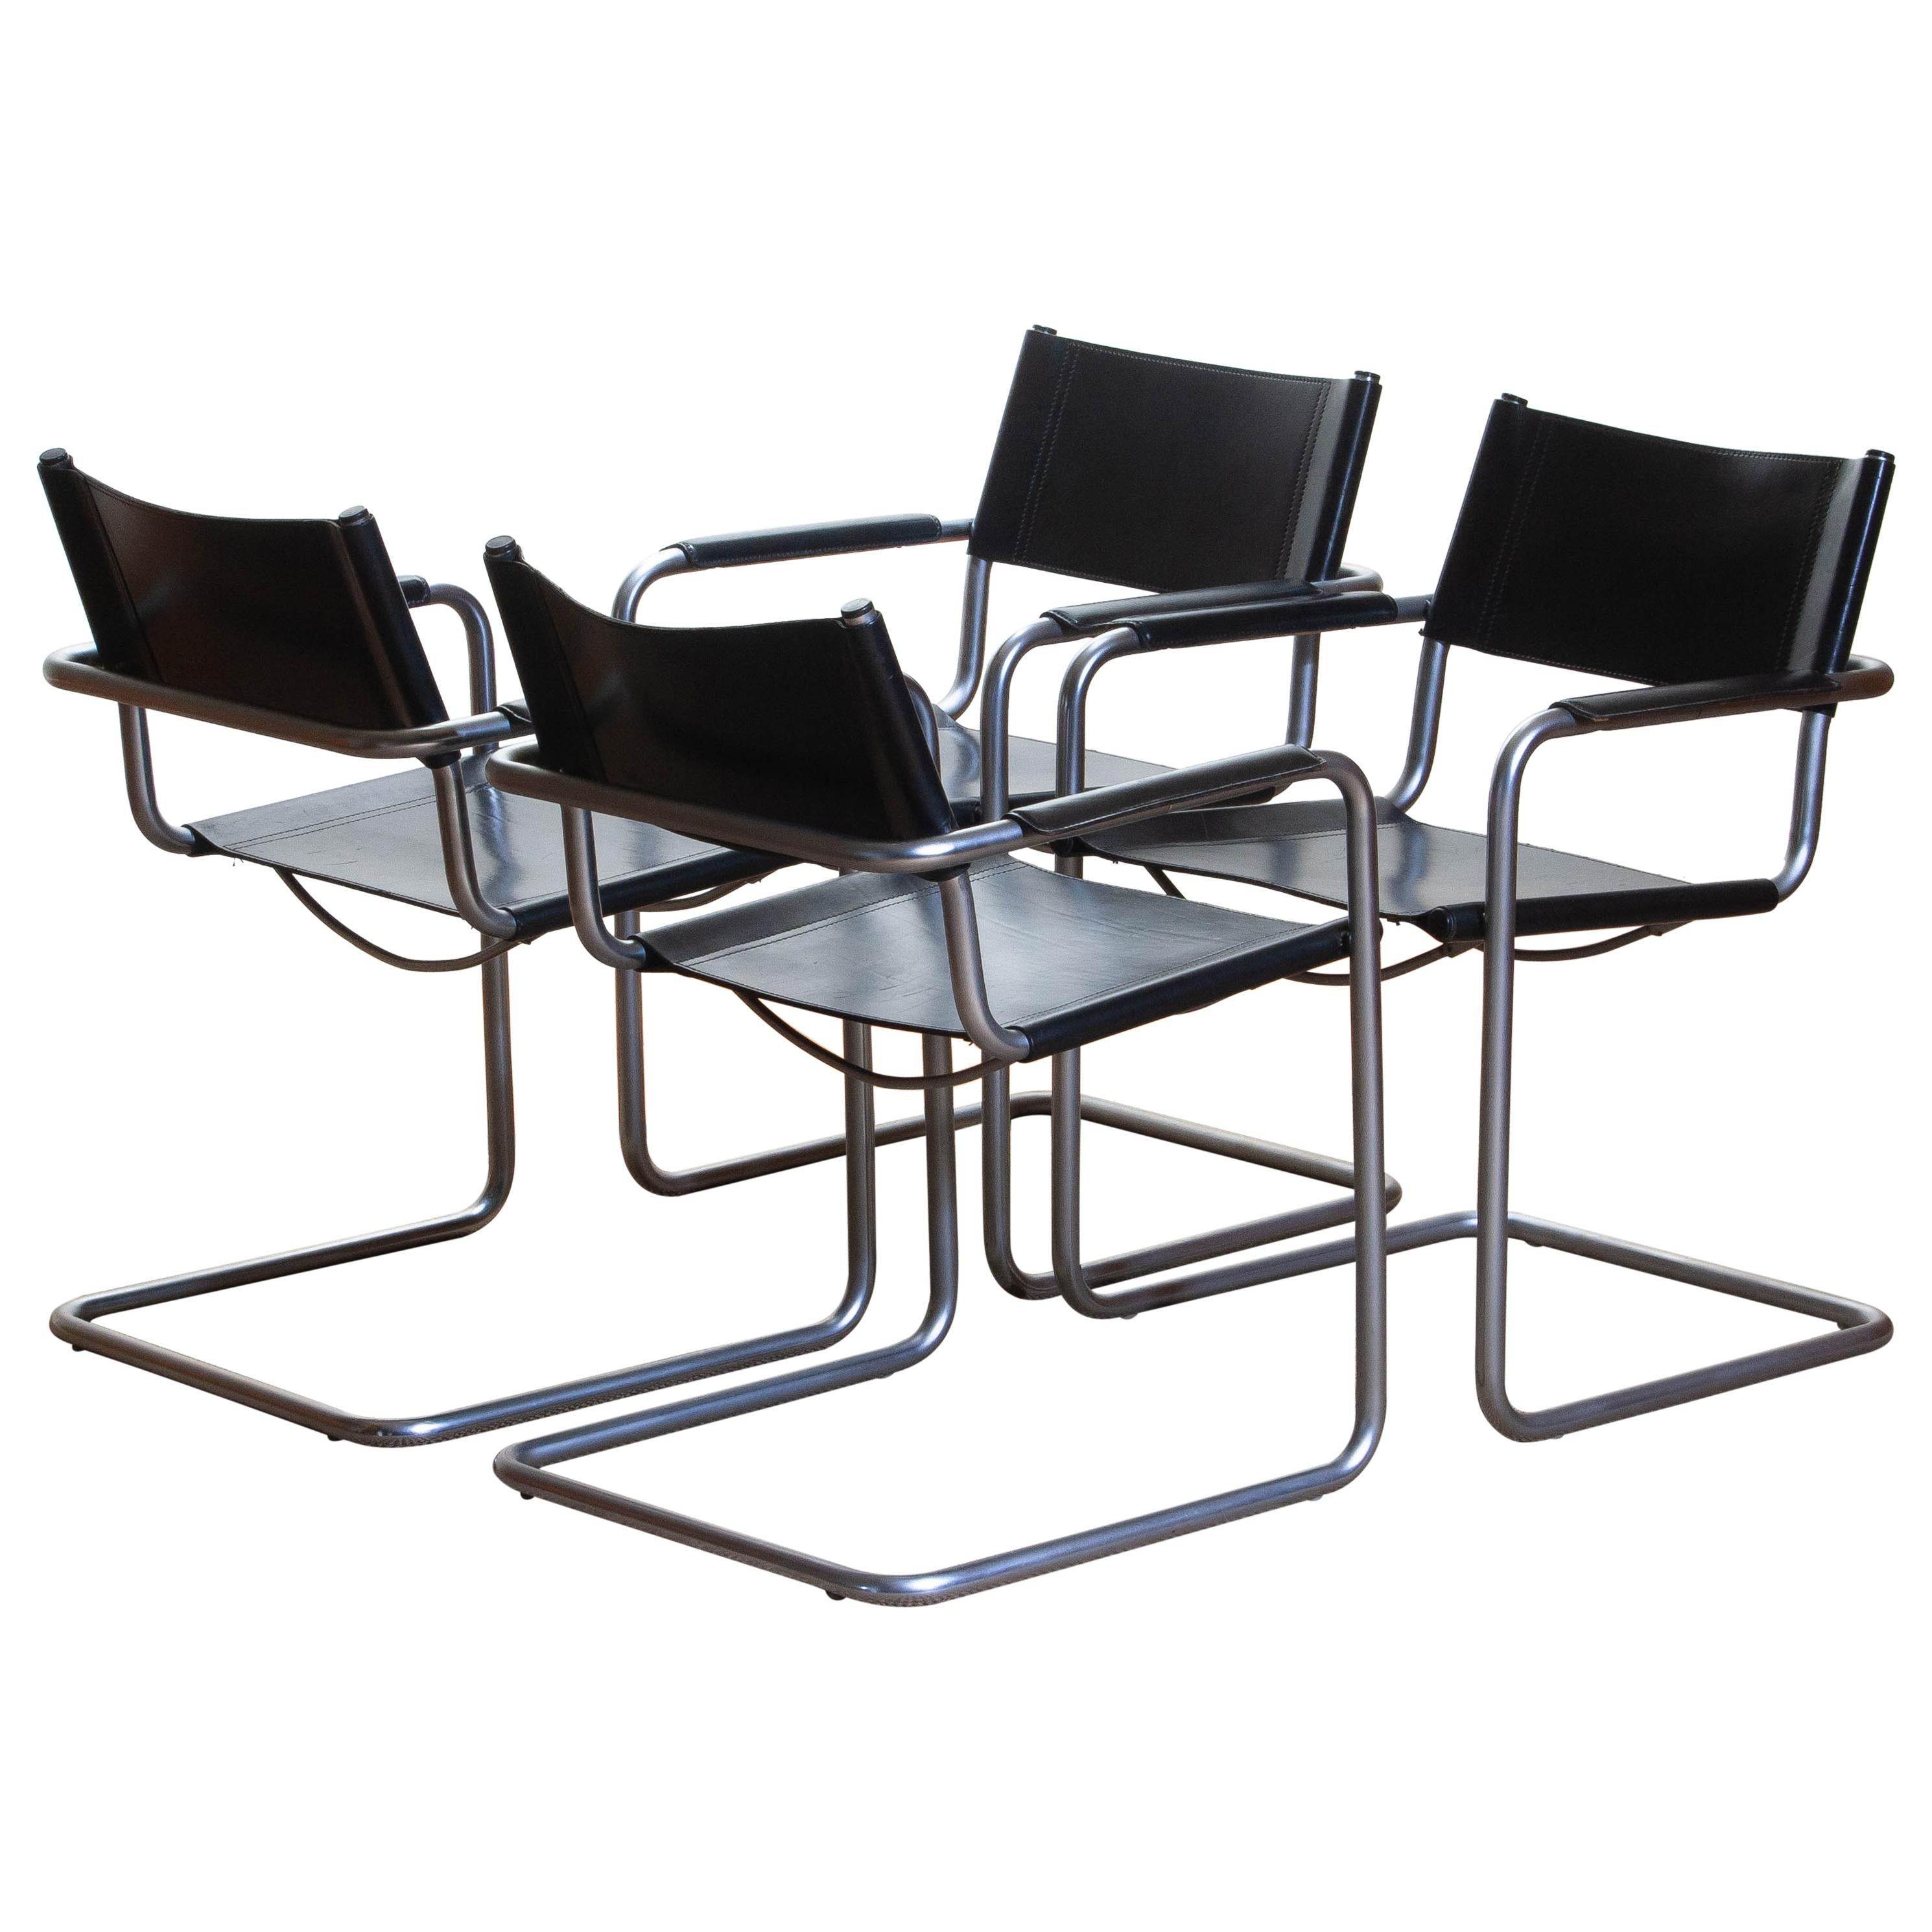 1970s, Set of Four Mg5 Black Leather Dining or Office Chairs by Matteo Grassi